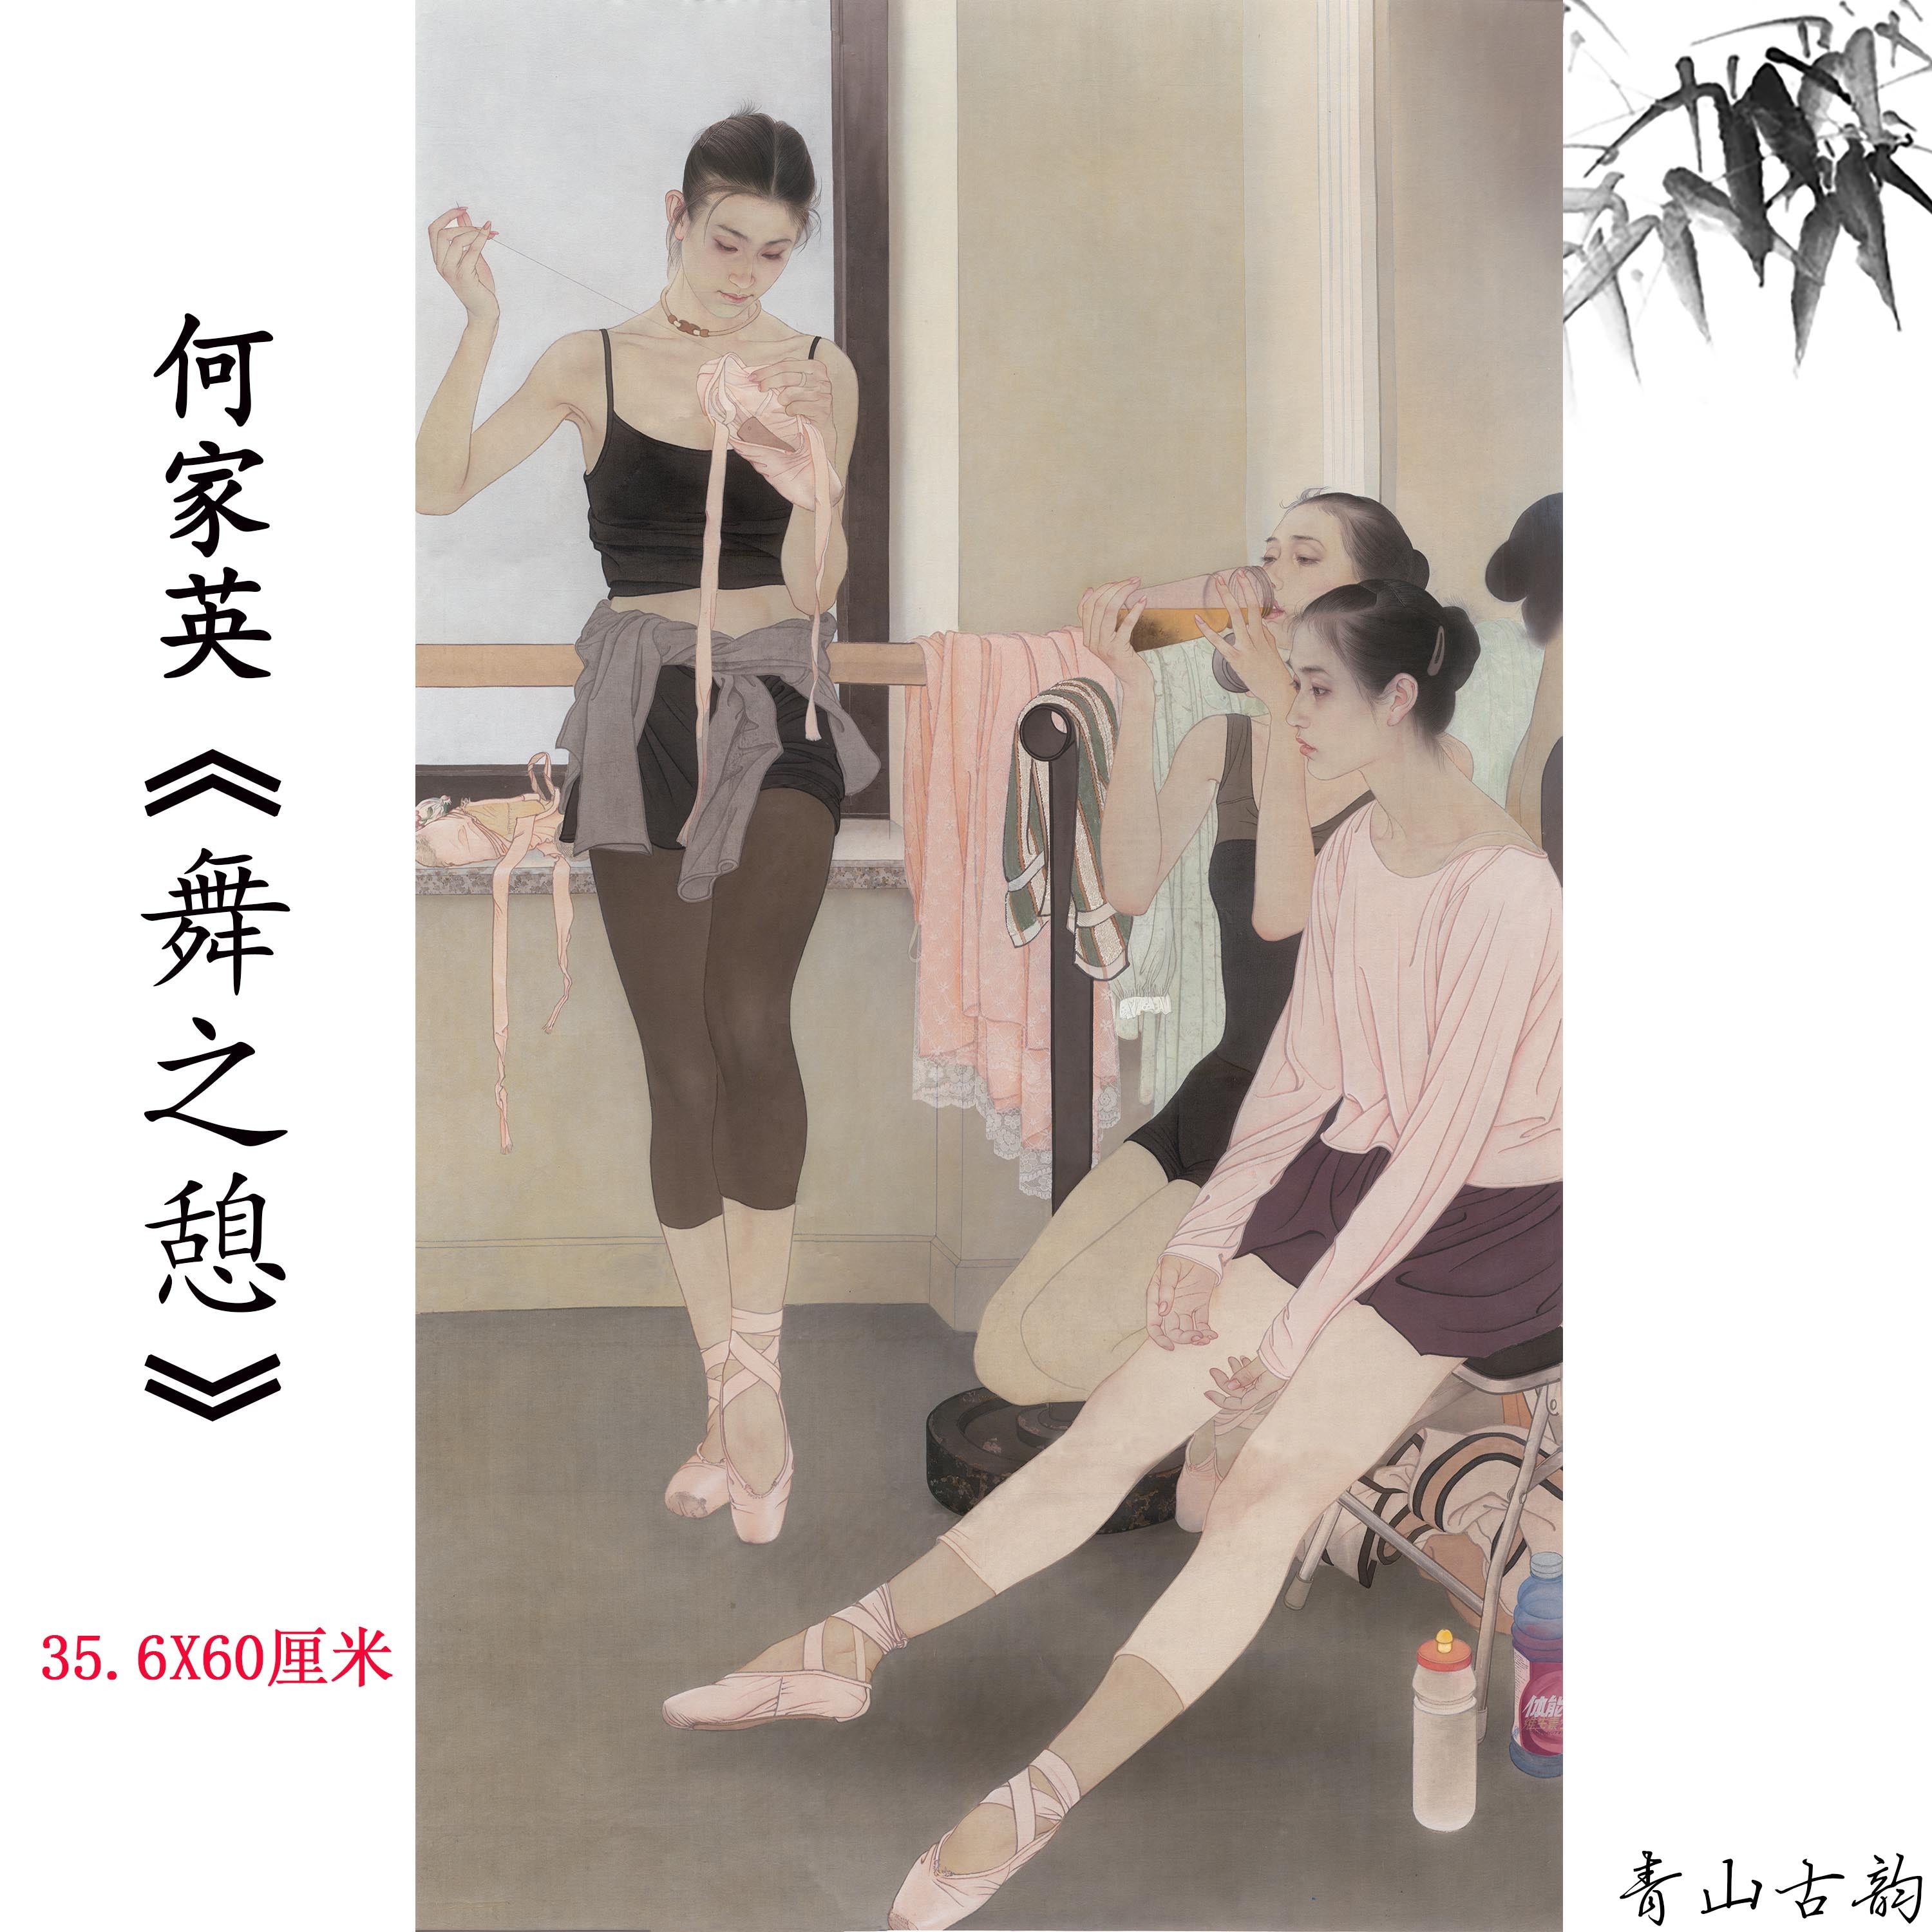 Chinese Antique Art Painting 何家英 舞之憩 He Jiaying Dance Rest